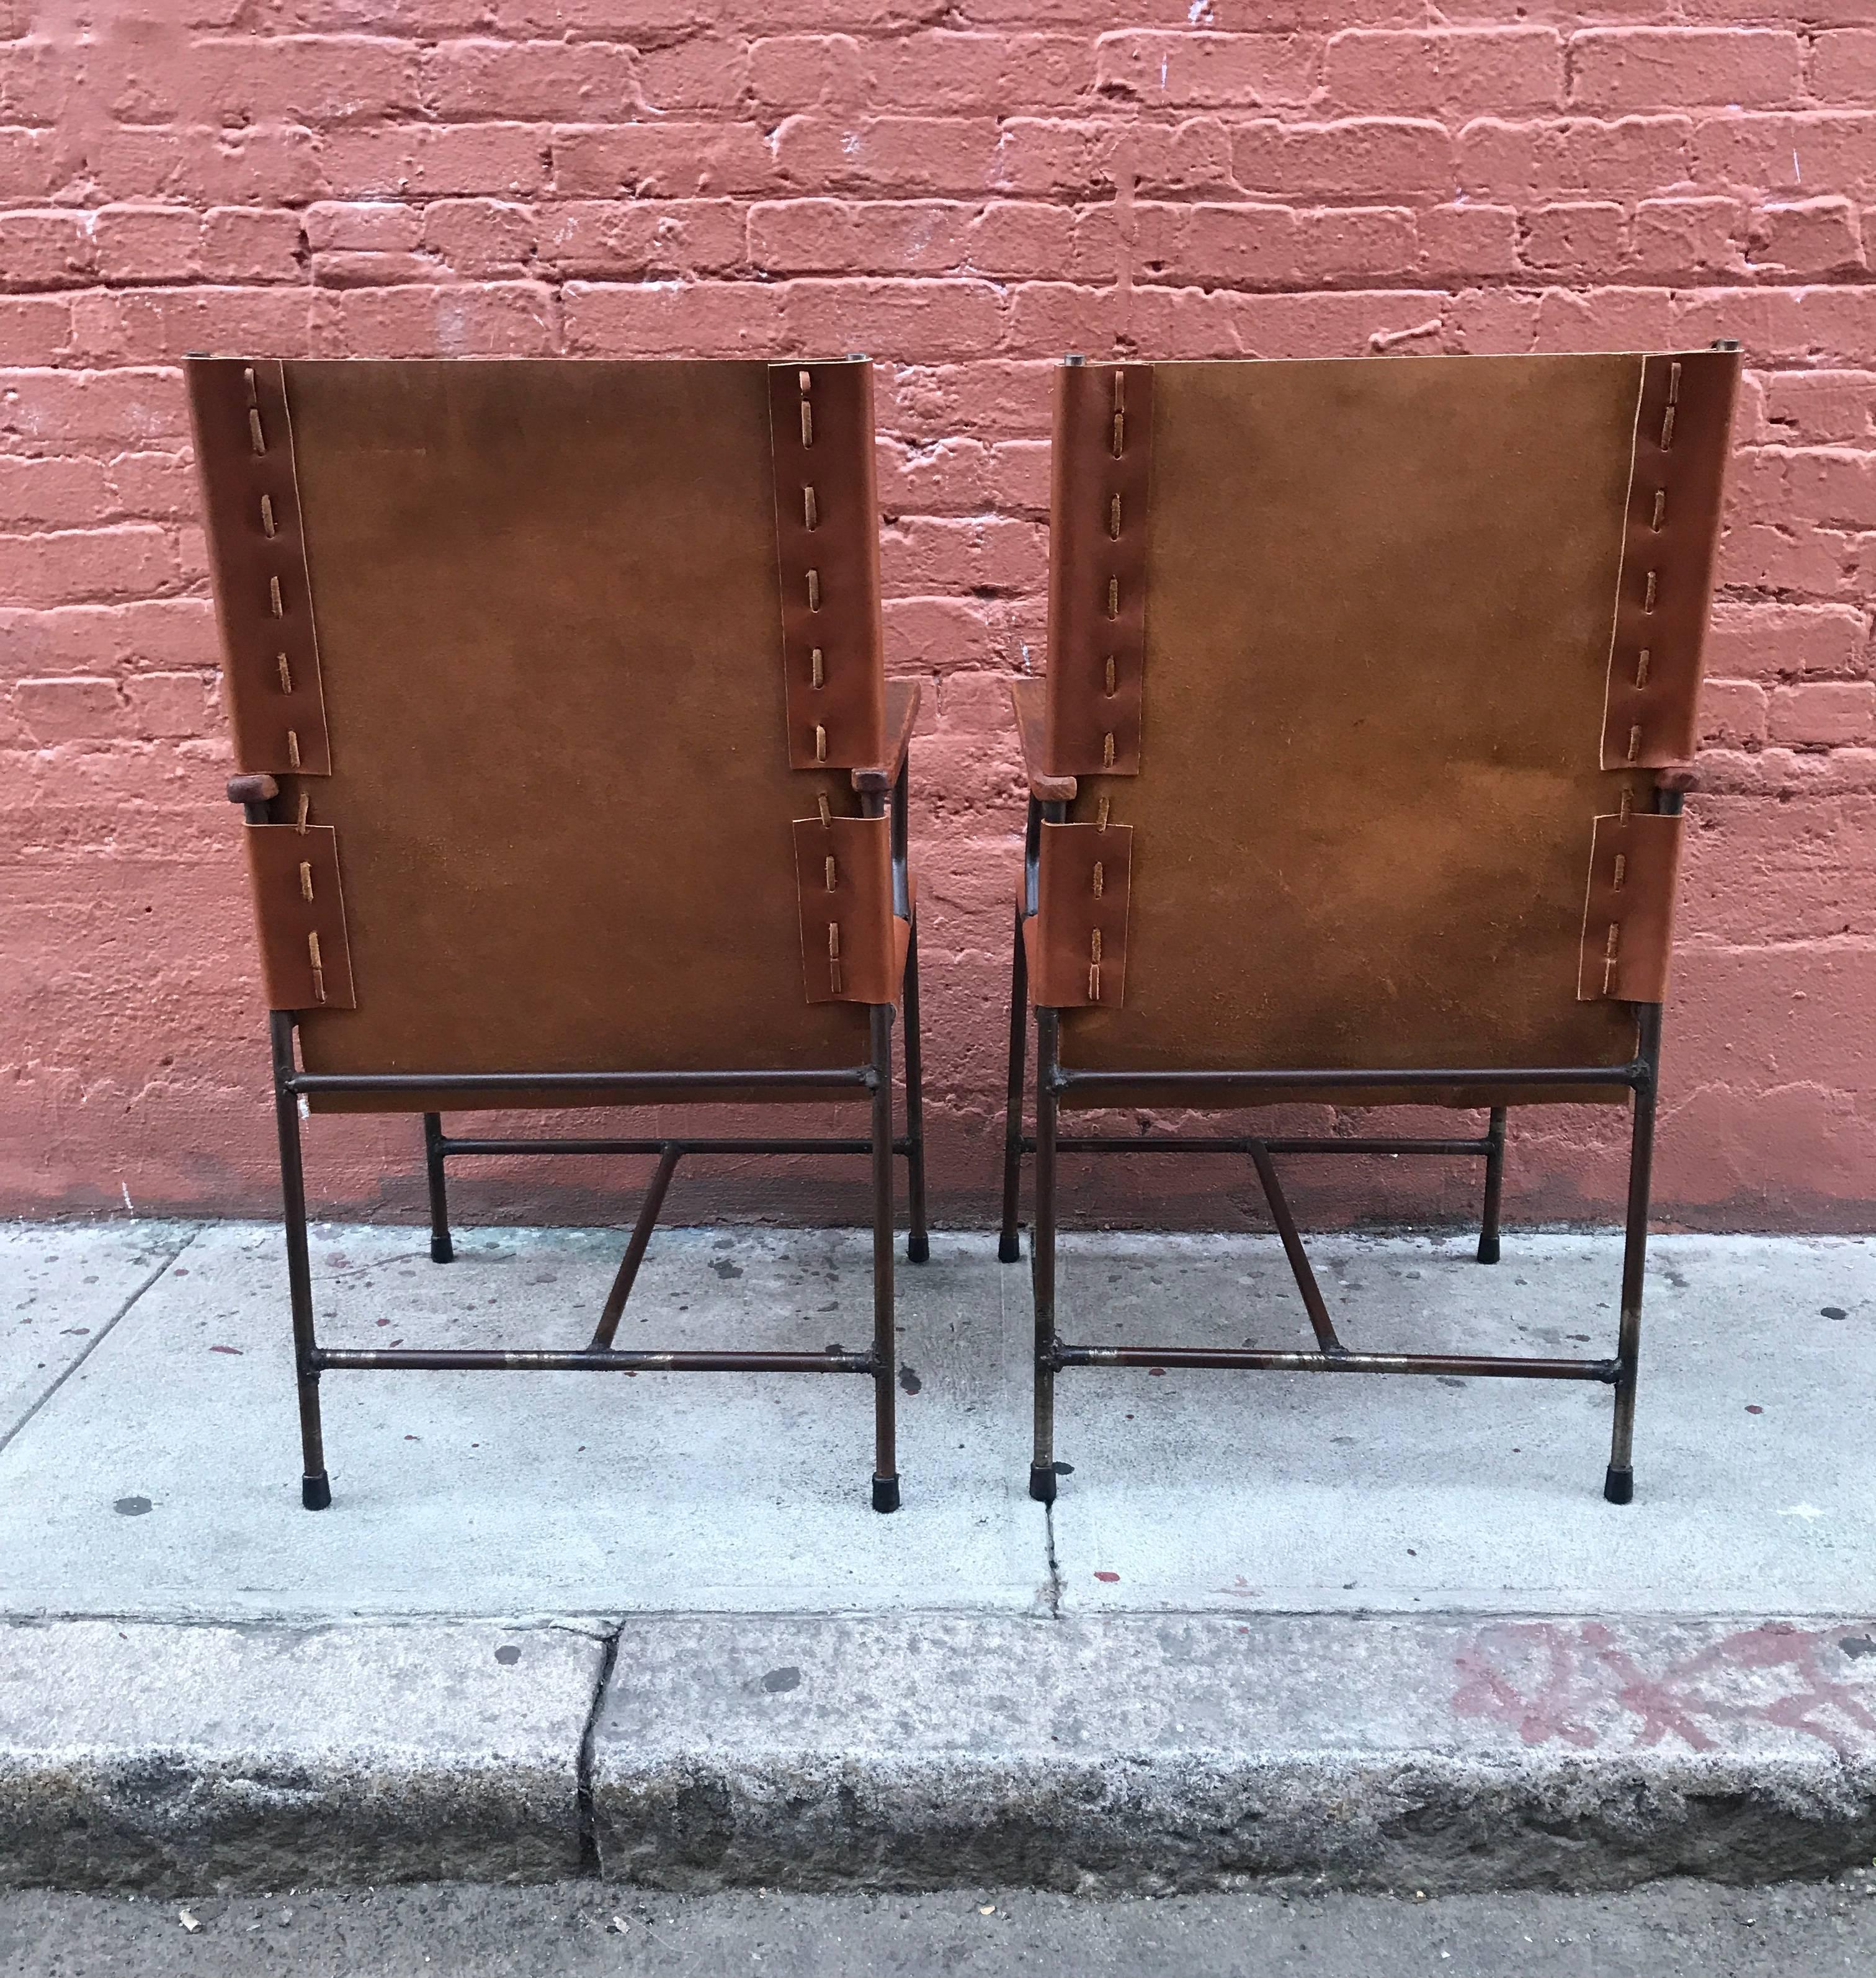 Pair of Mexican Modern Armchairs in Iron and Leather, circa 1950s For Sale 4